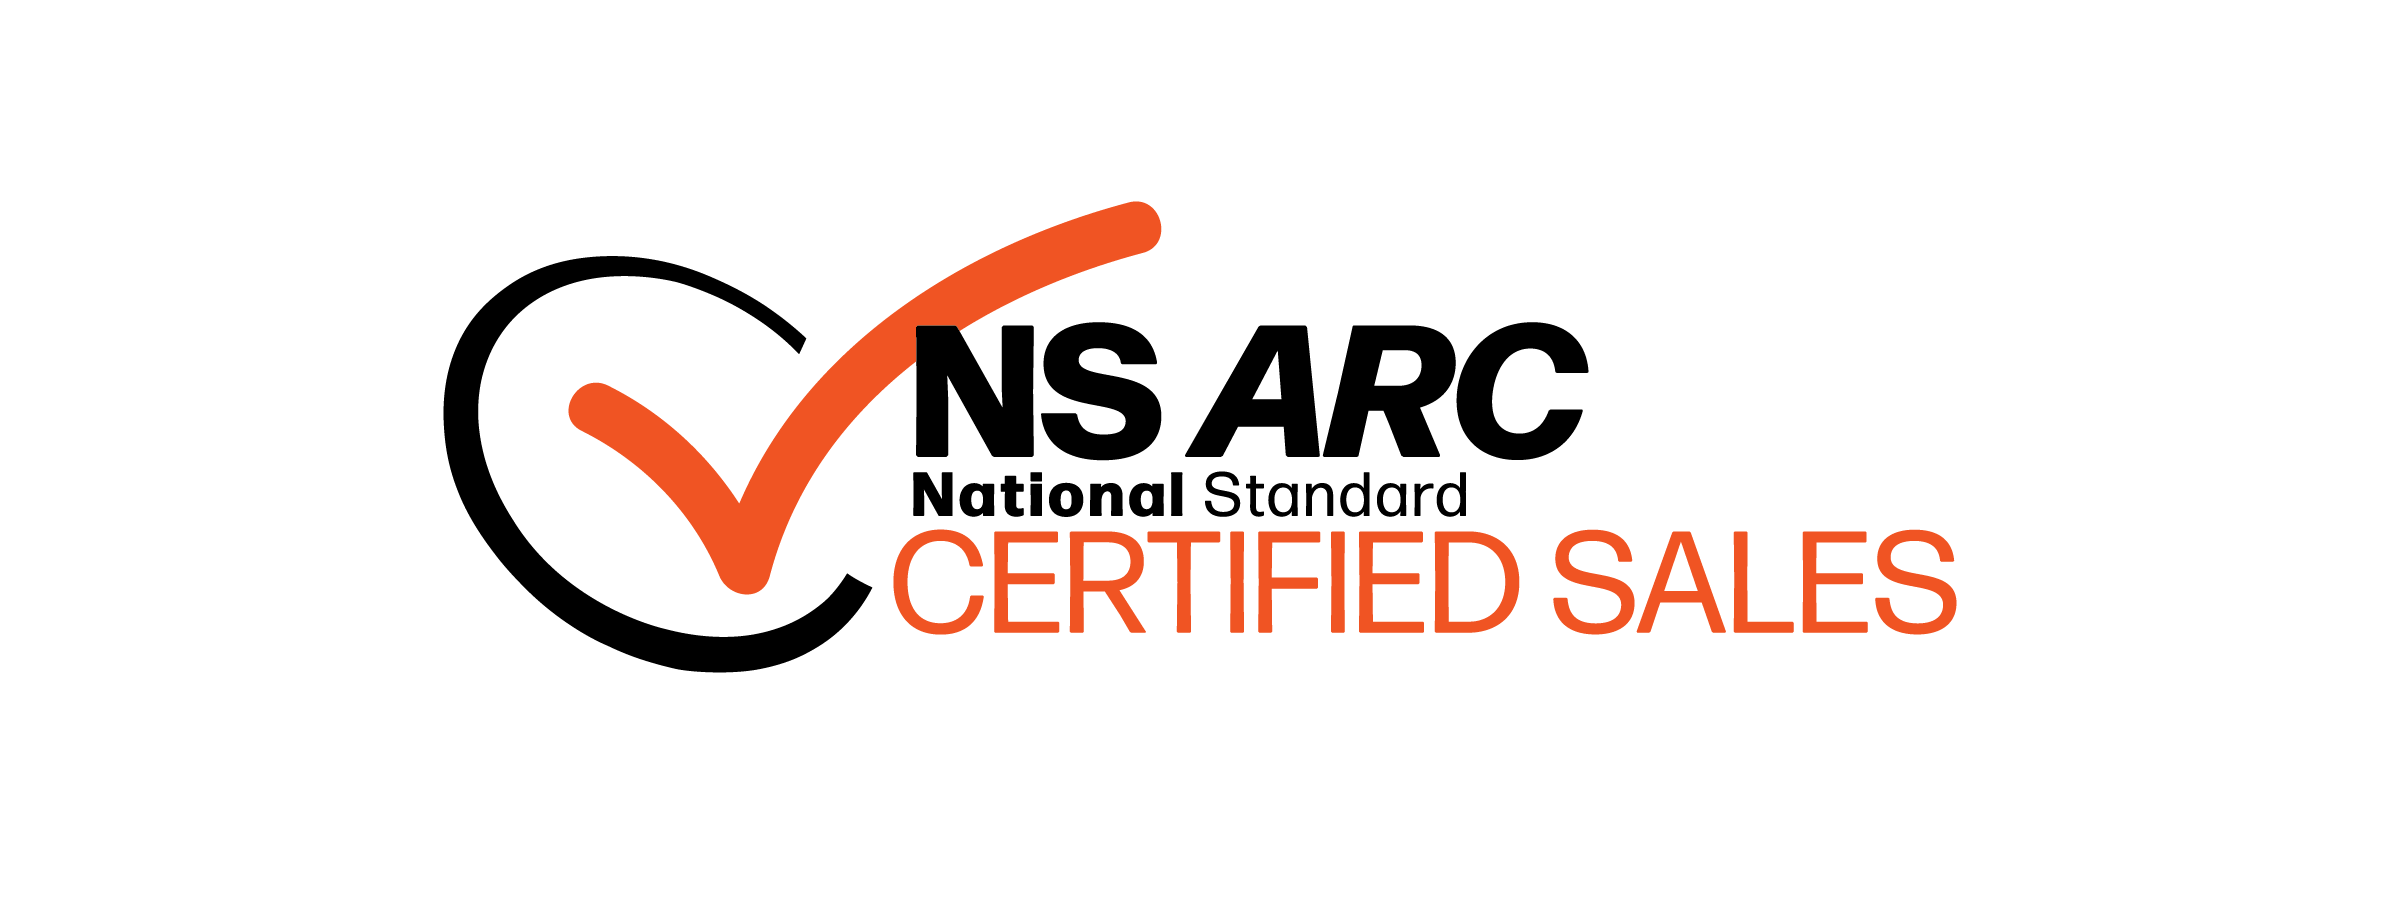 NS ARC Certified Sales